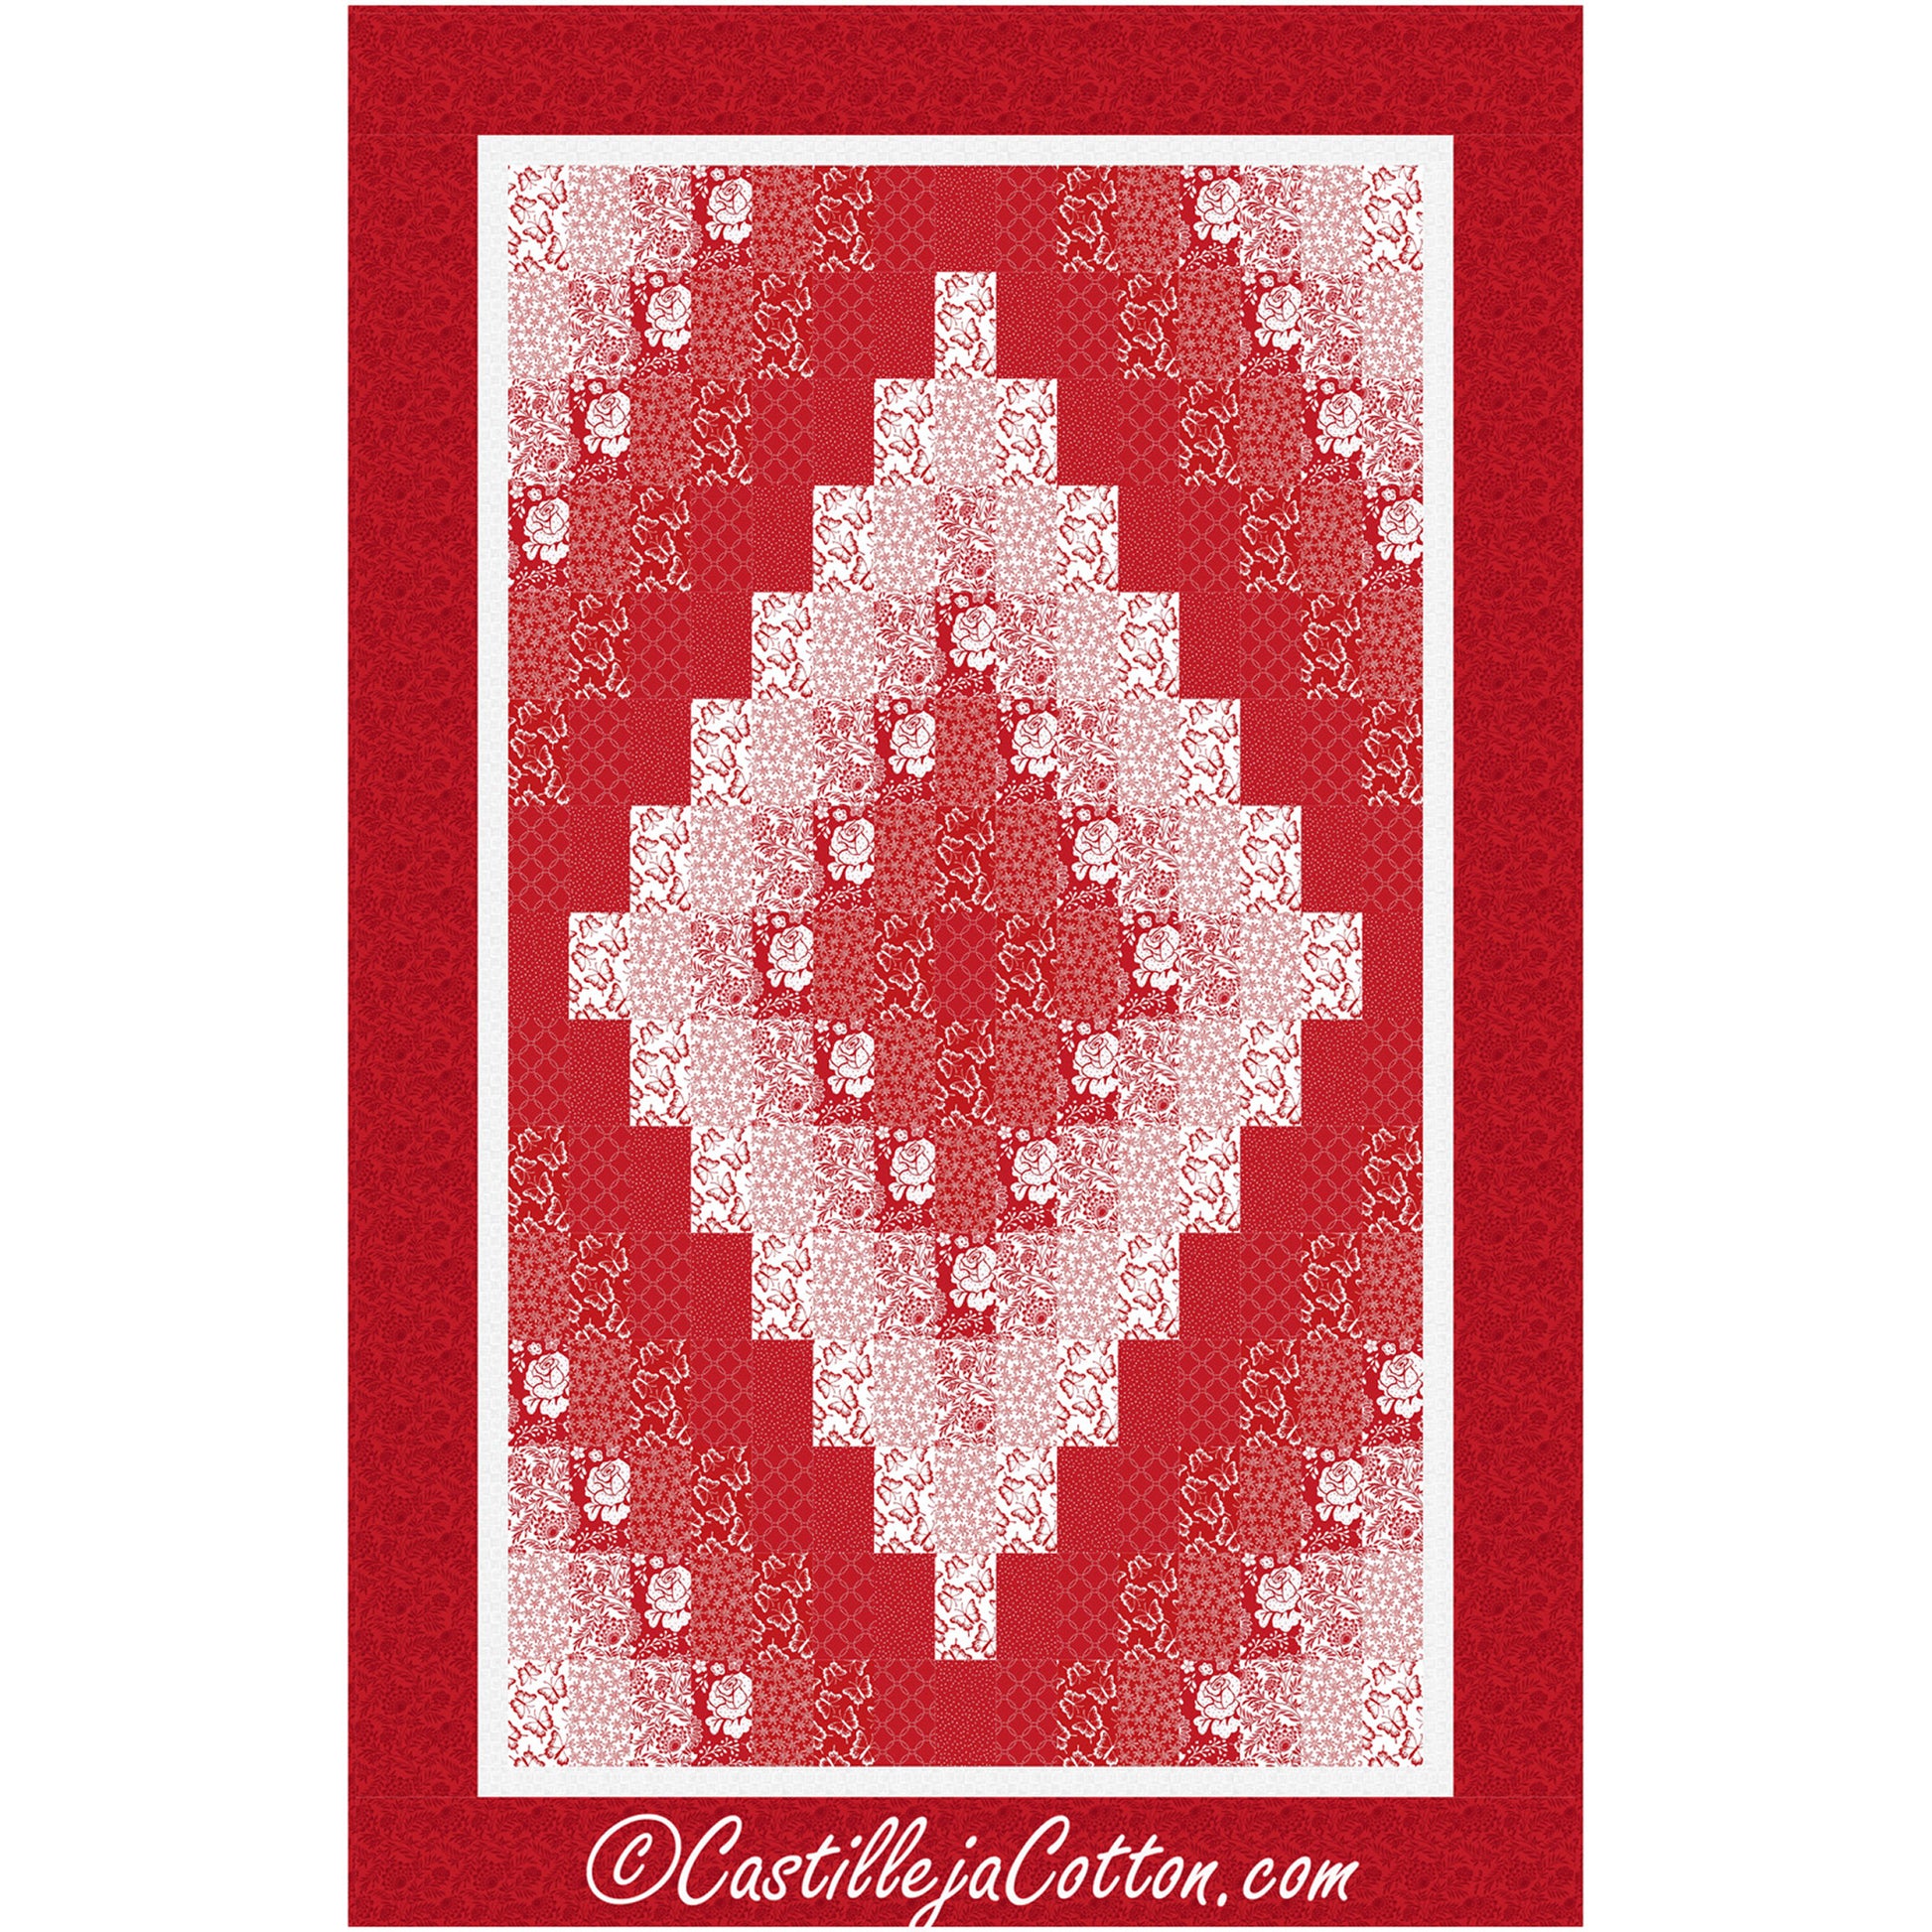 A vibrant red and white quilt showcasing a beautiful diamond pattern in a Bargello design.